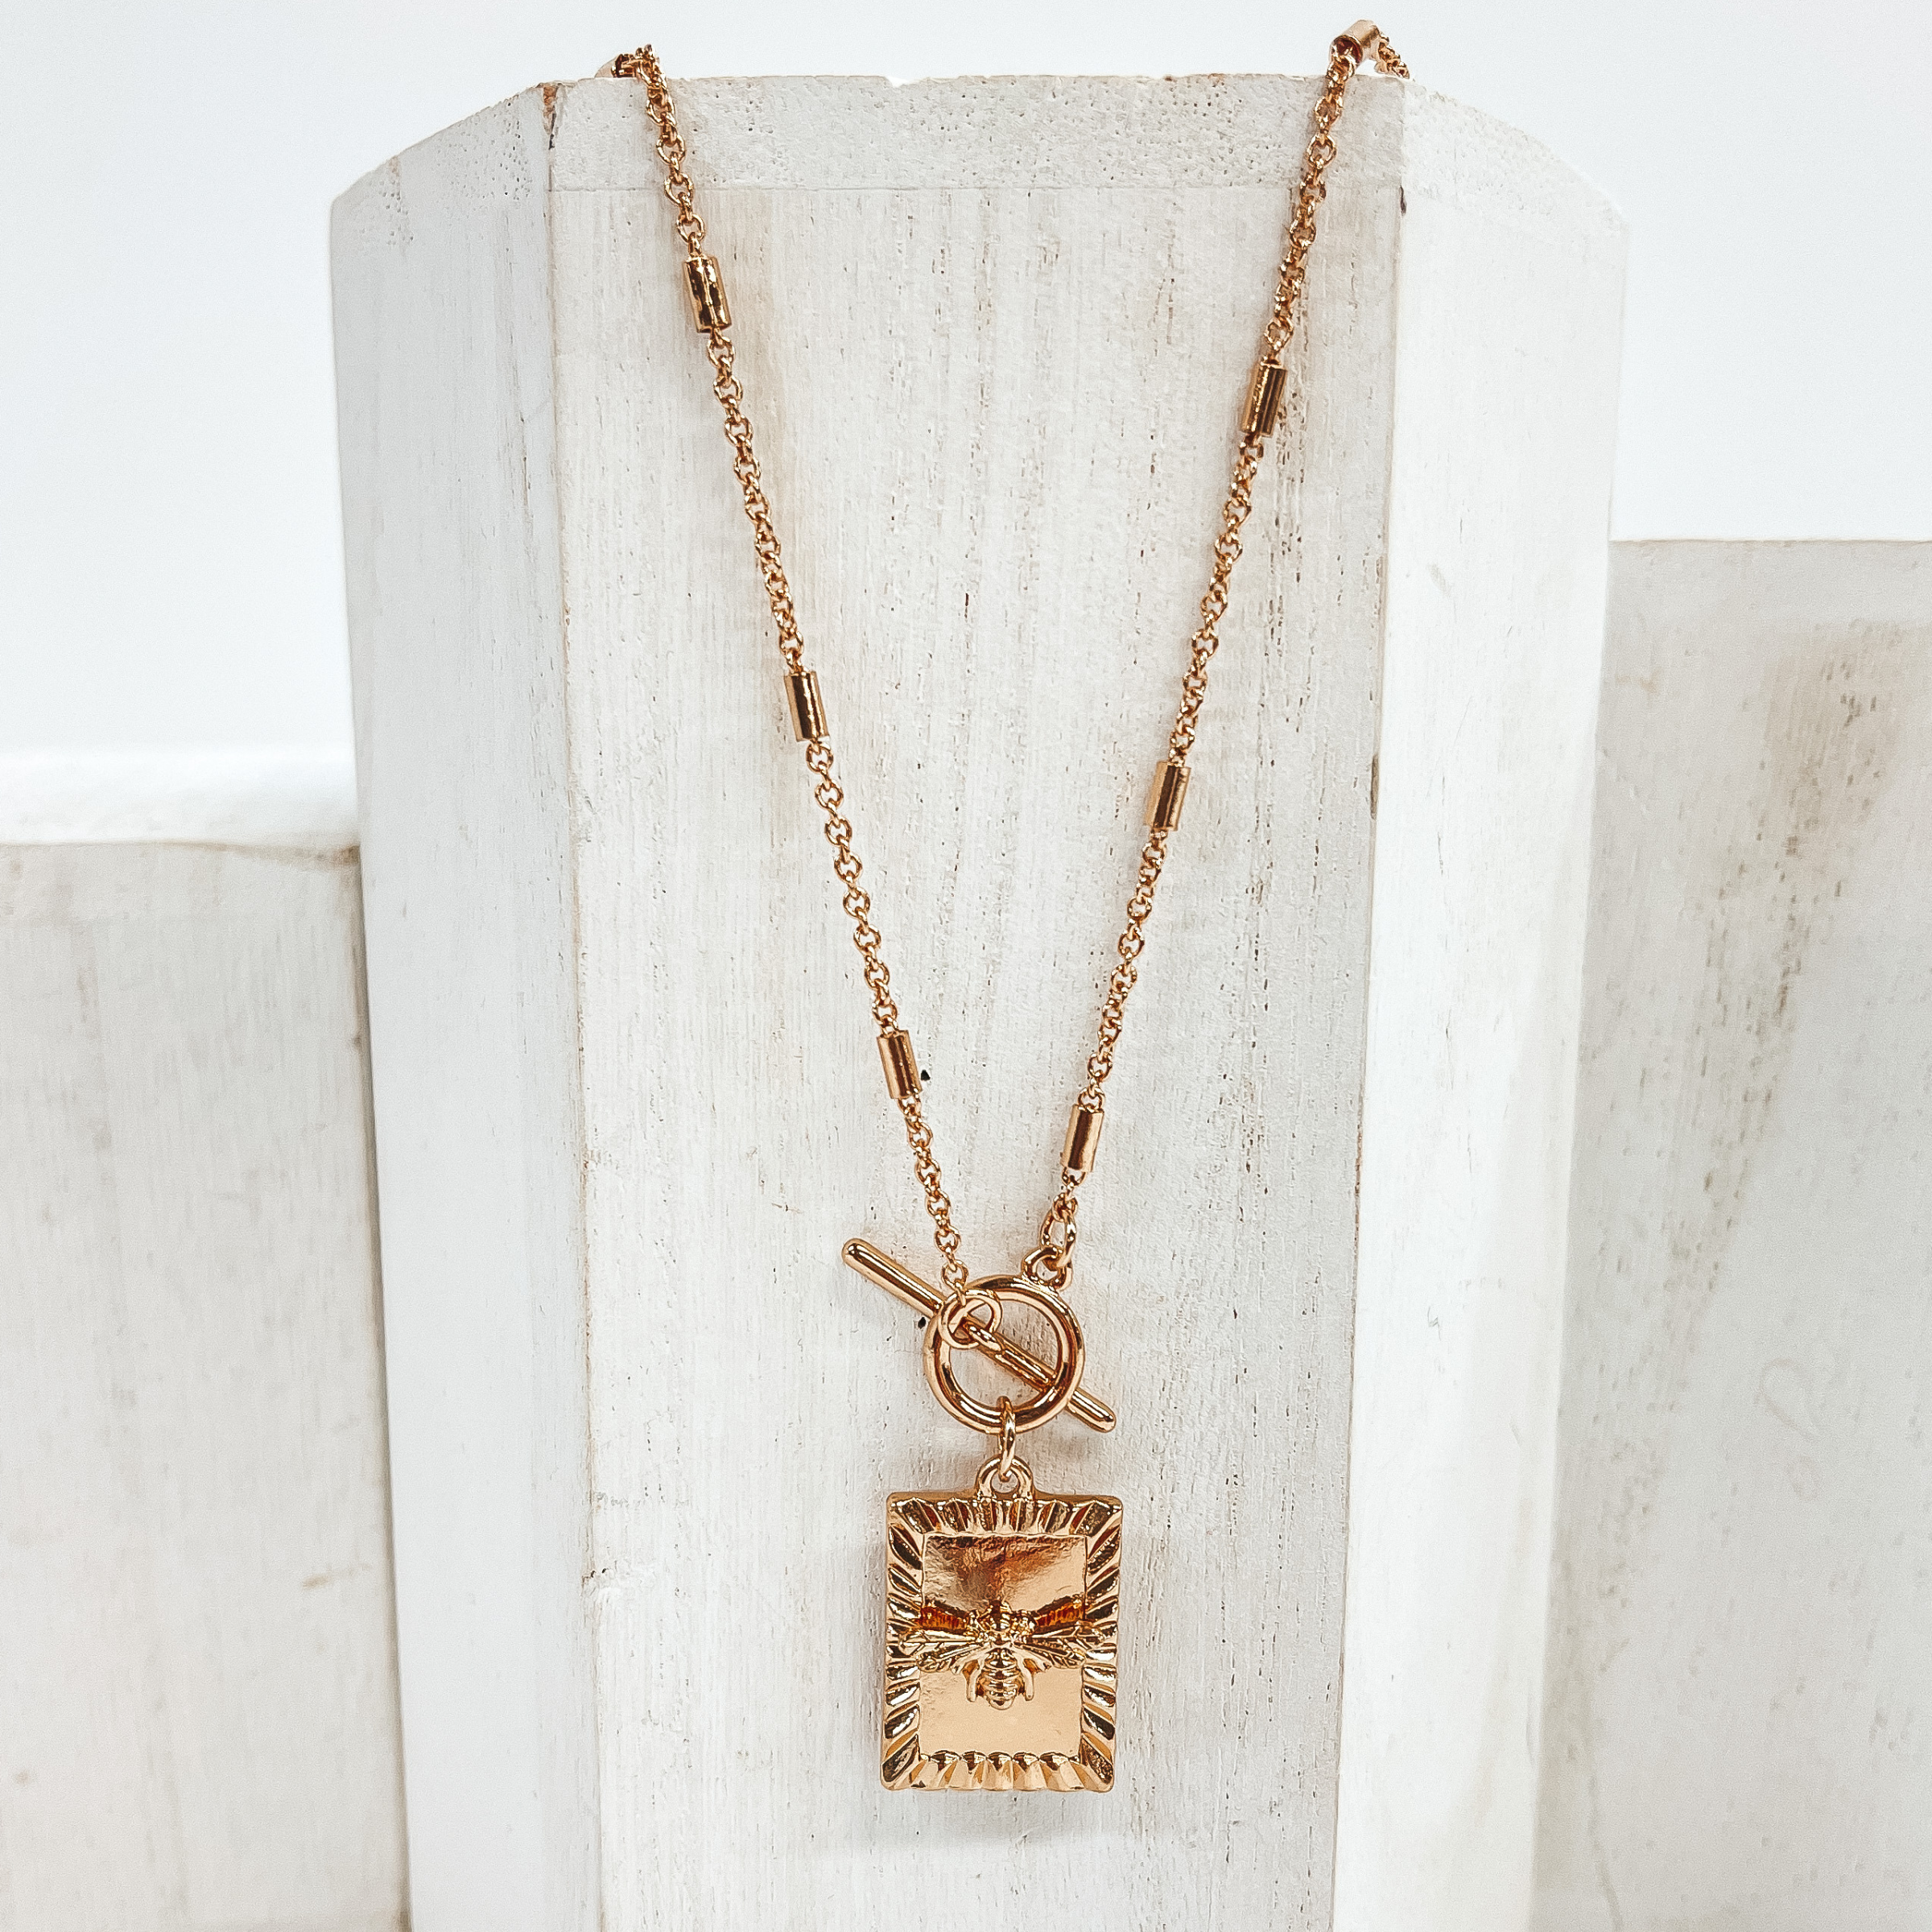 This is a gold necklace with gold spacers along  the chain. It has a front toggle clasp and a  square pendant with a bumble  bee charm. This necklace is pictured laying on a  white block and on a white background